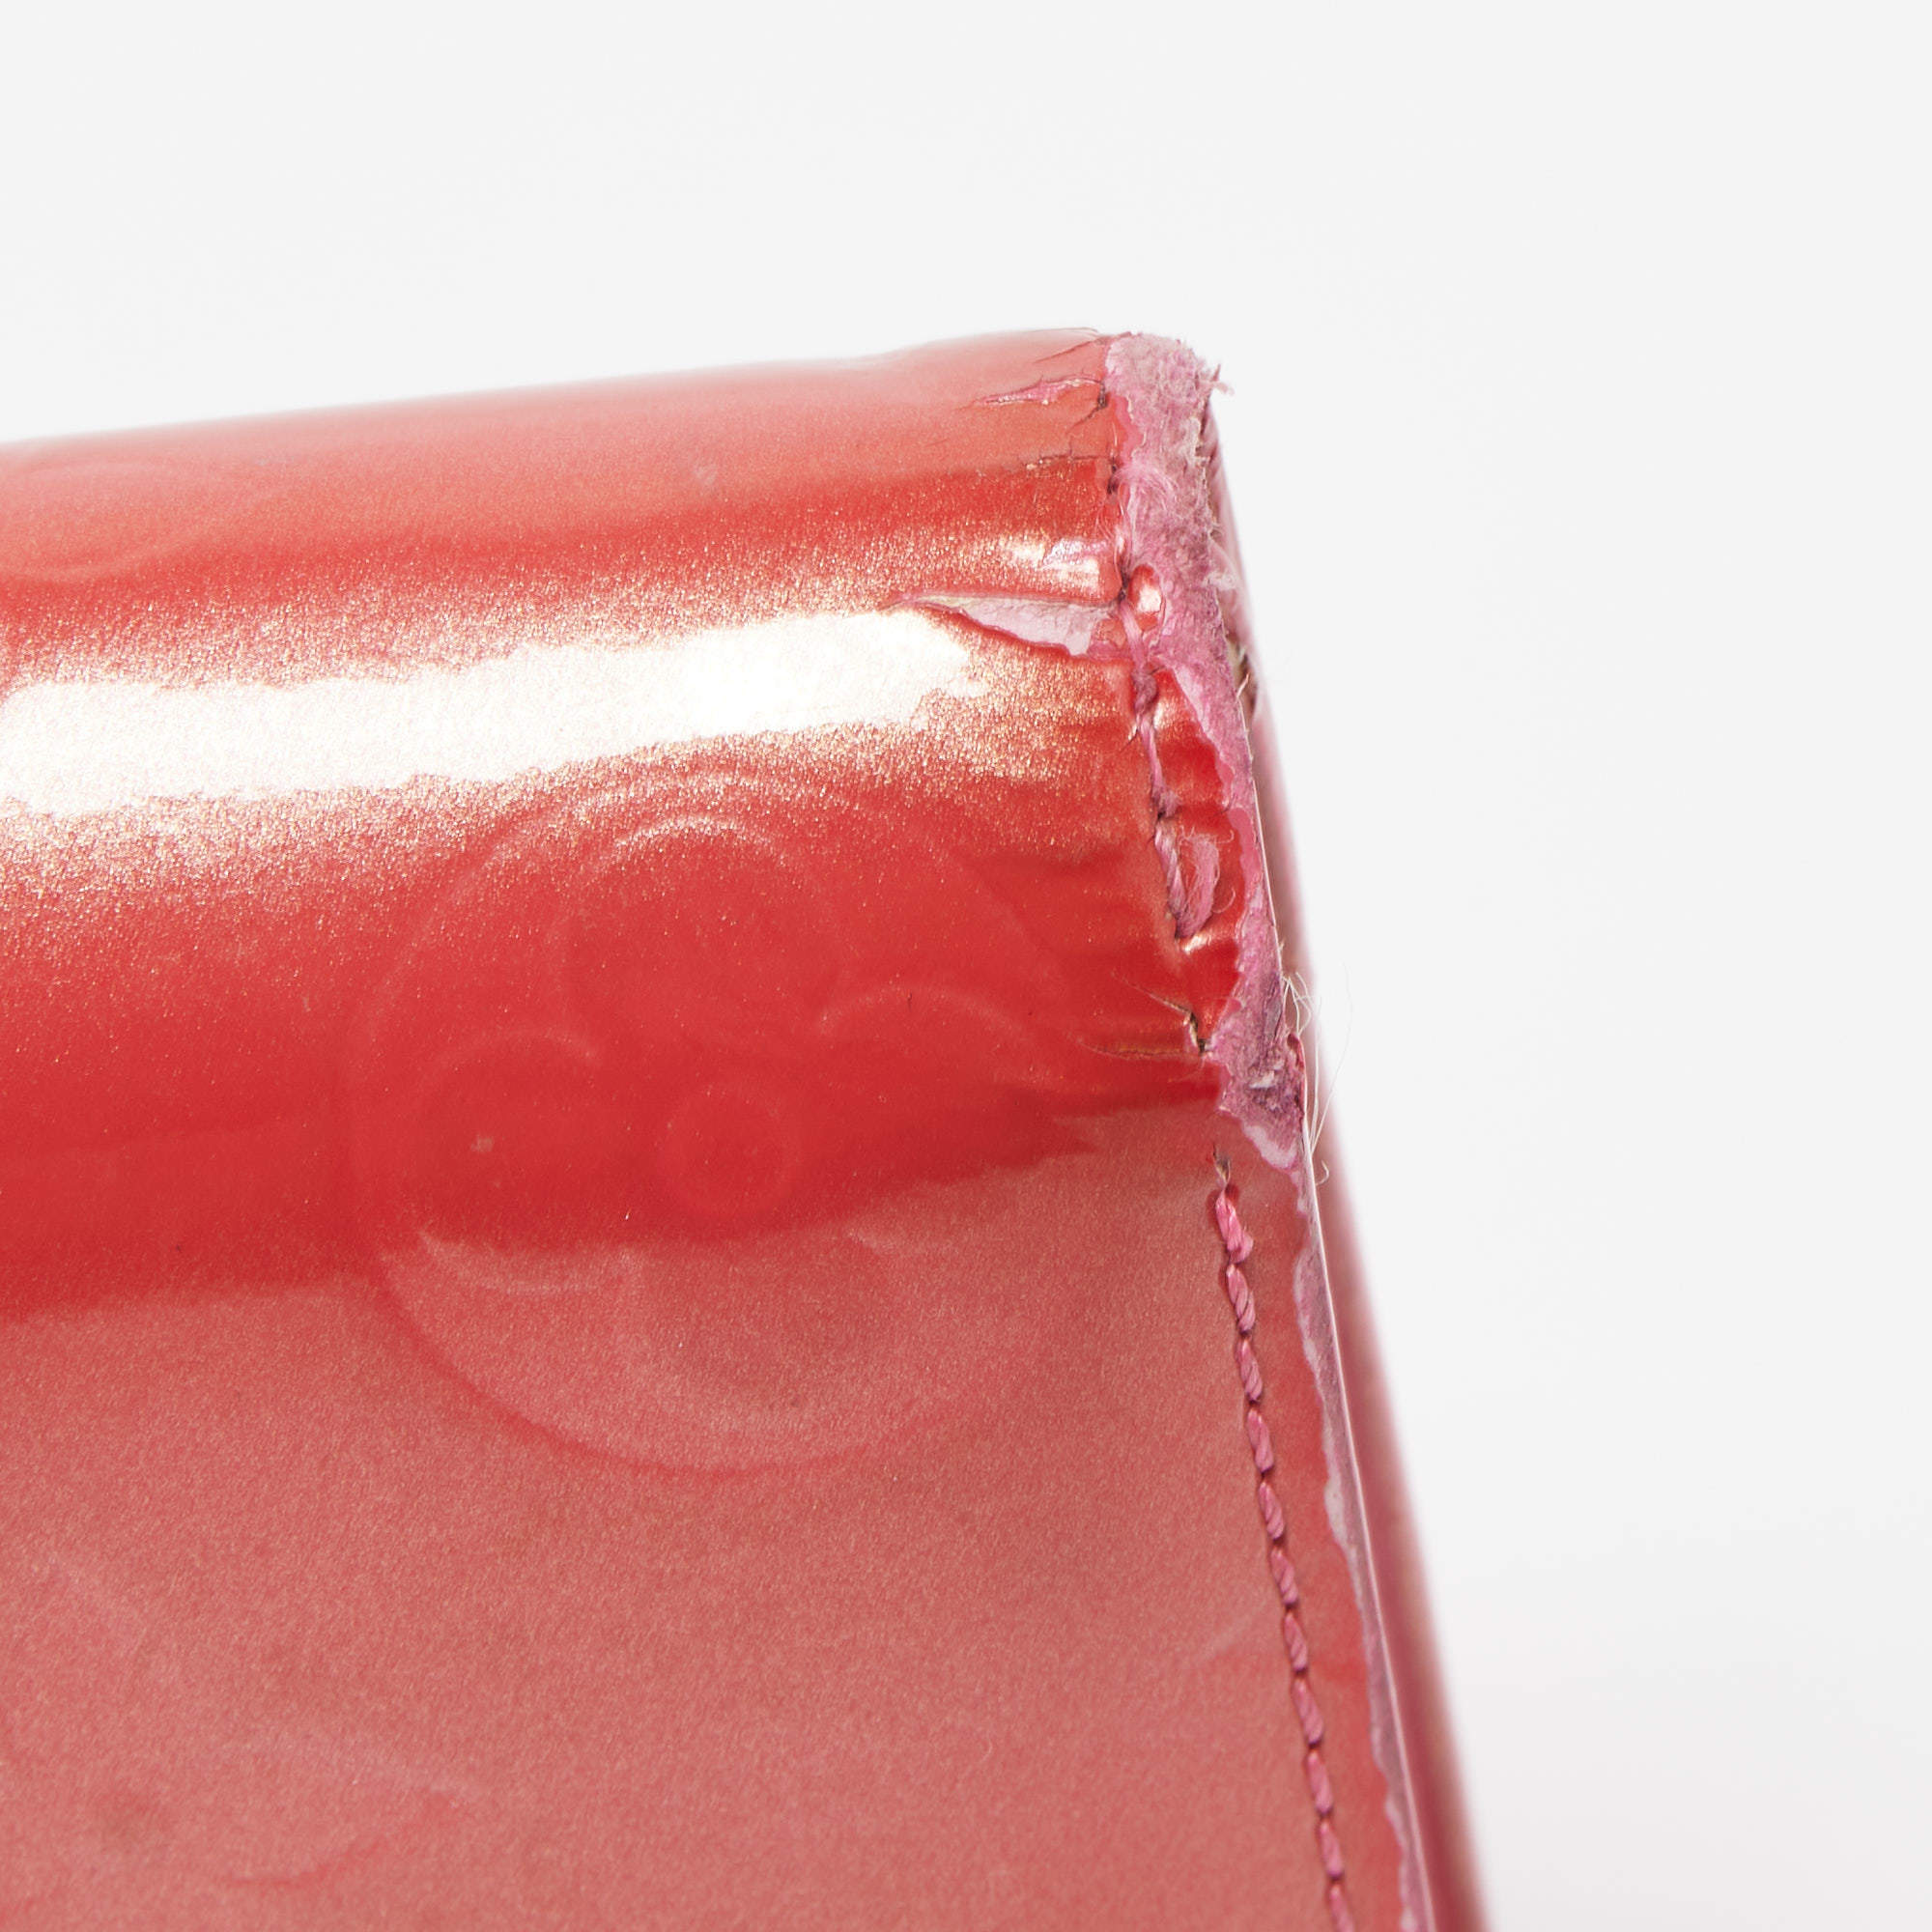 Sarah patent leather wallet Louis Vuitton Pink in Patent leather - 31174867